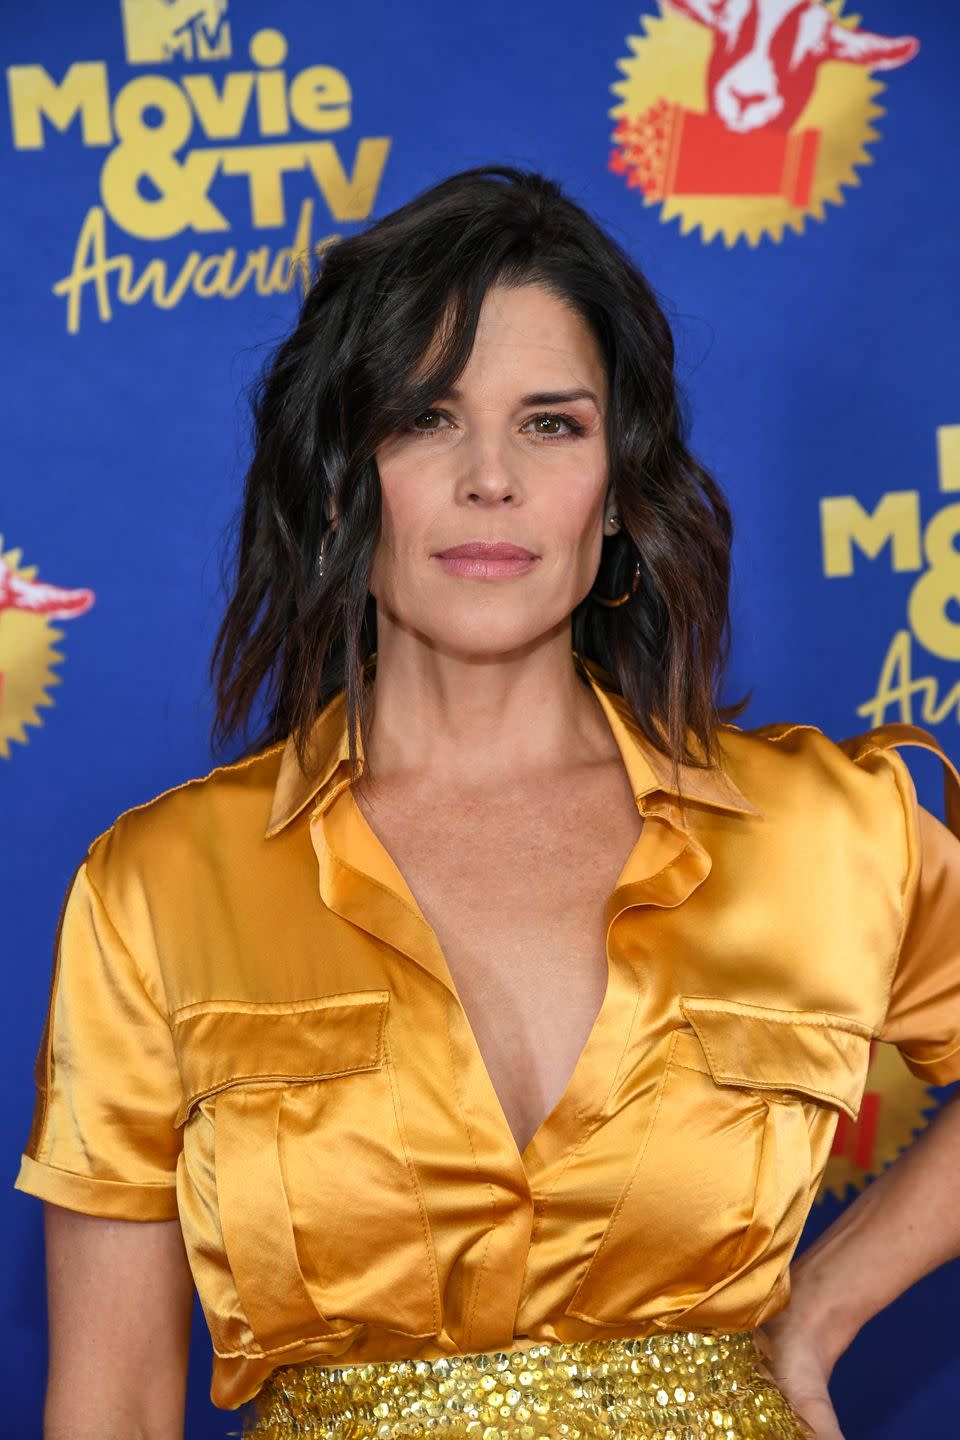 2) Neve Campbell, 2020